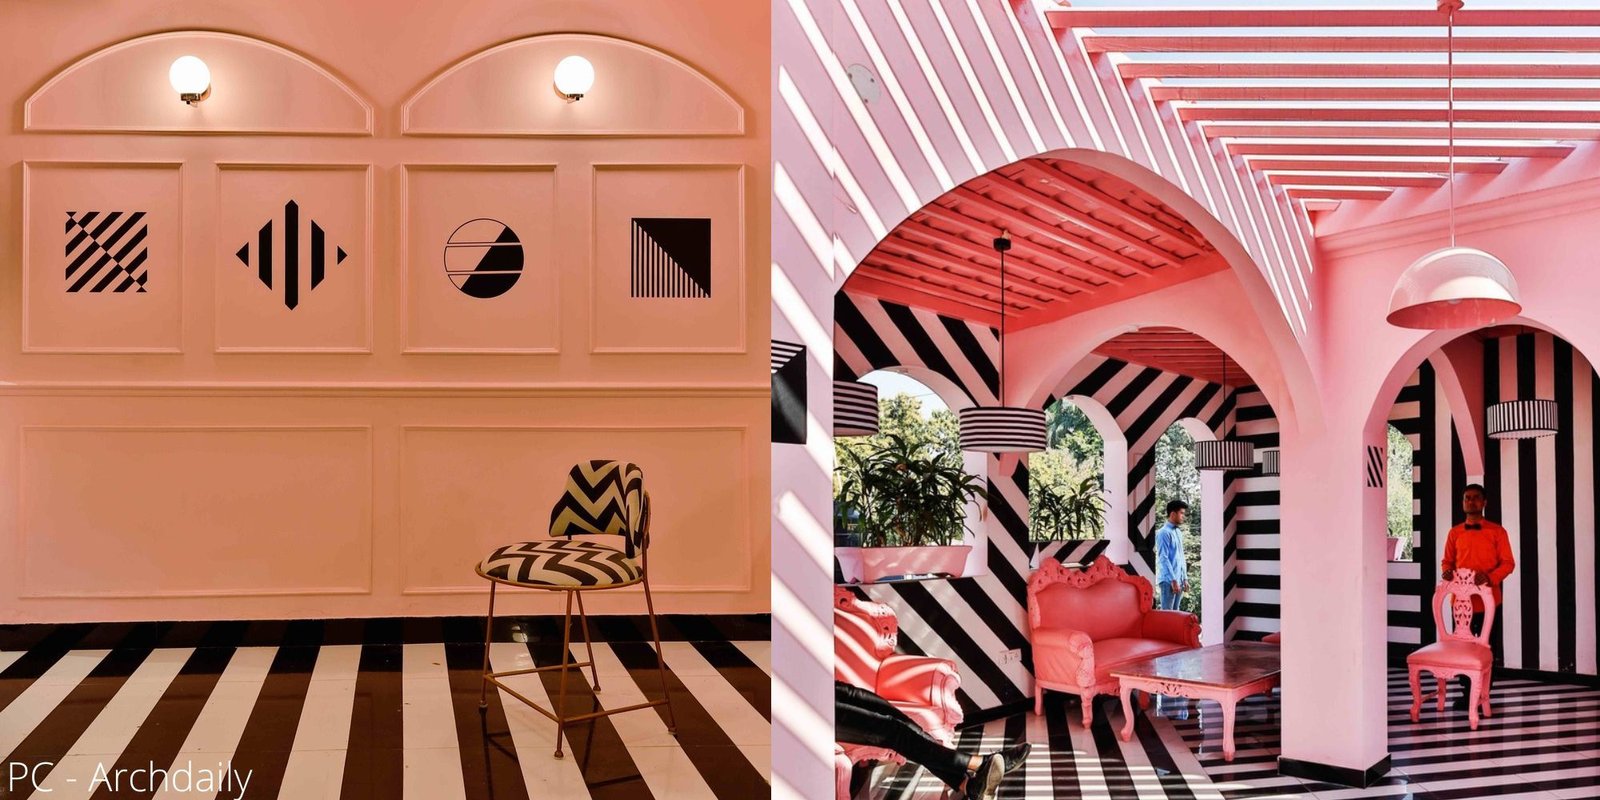 Pink Zebra: The Breath-taking And Quirky Restaurant Inspired By The Ideas Of West Anderson